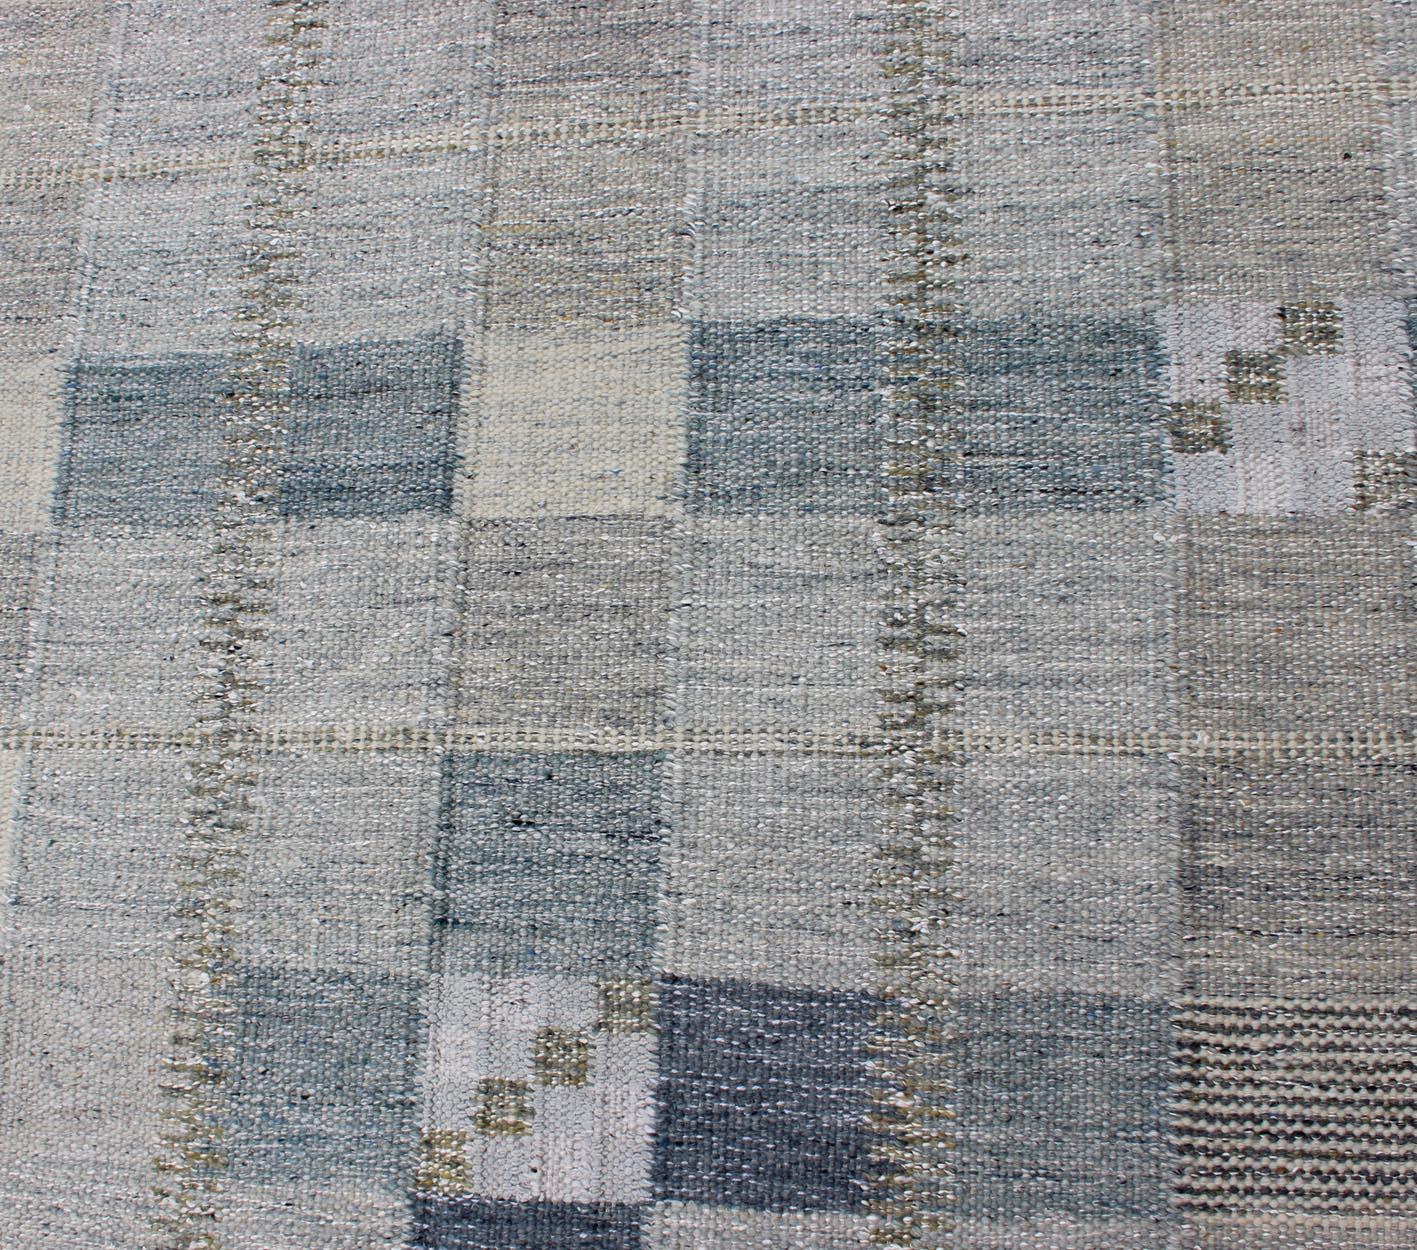 Contemporary Scandinavian Flat-Weave Design Rug with Checkerboard Design in Gray and Blue